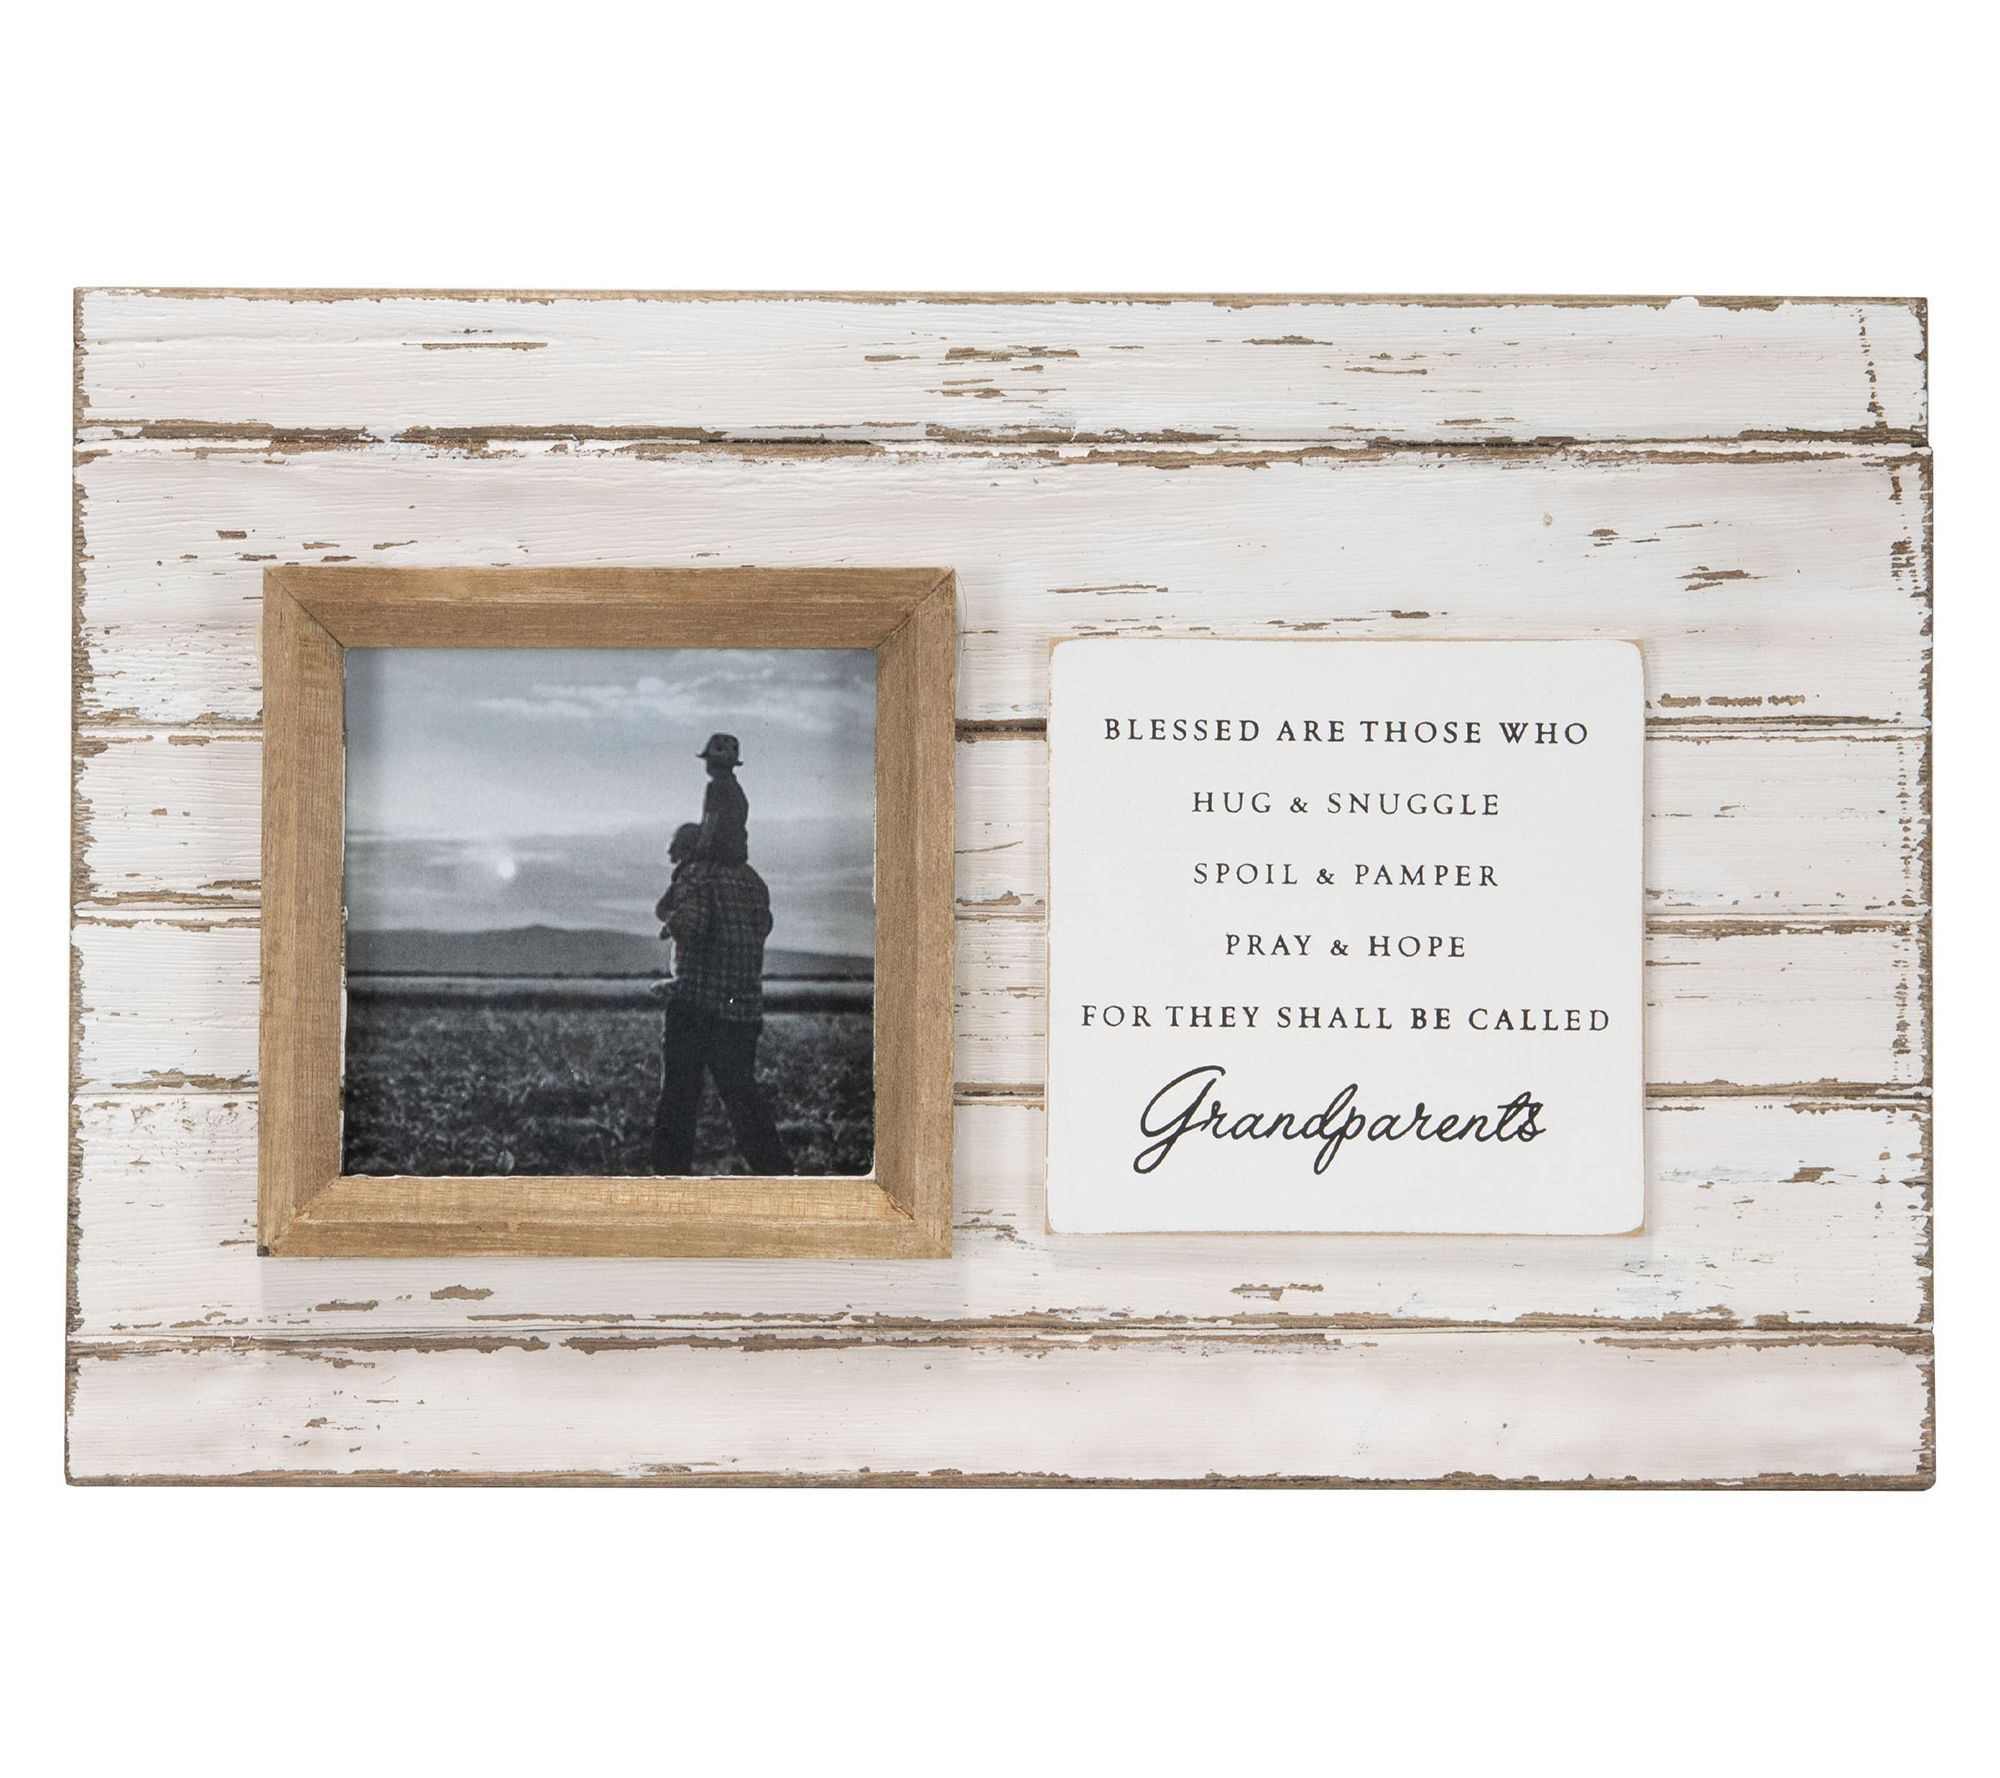 4 x 6 inch Decorative Distressed Wood Picture Frame with Nail Accents -  Holds 5 4x6 Photos - Foreside Home & Garden